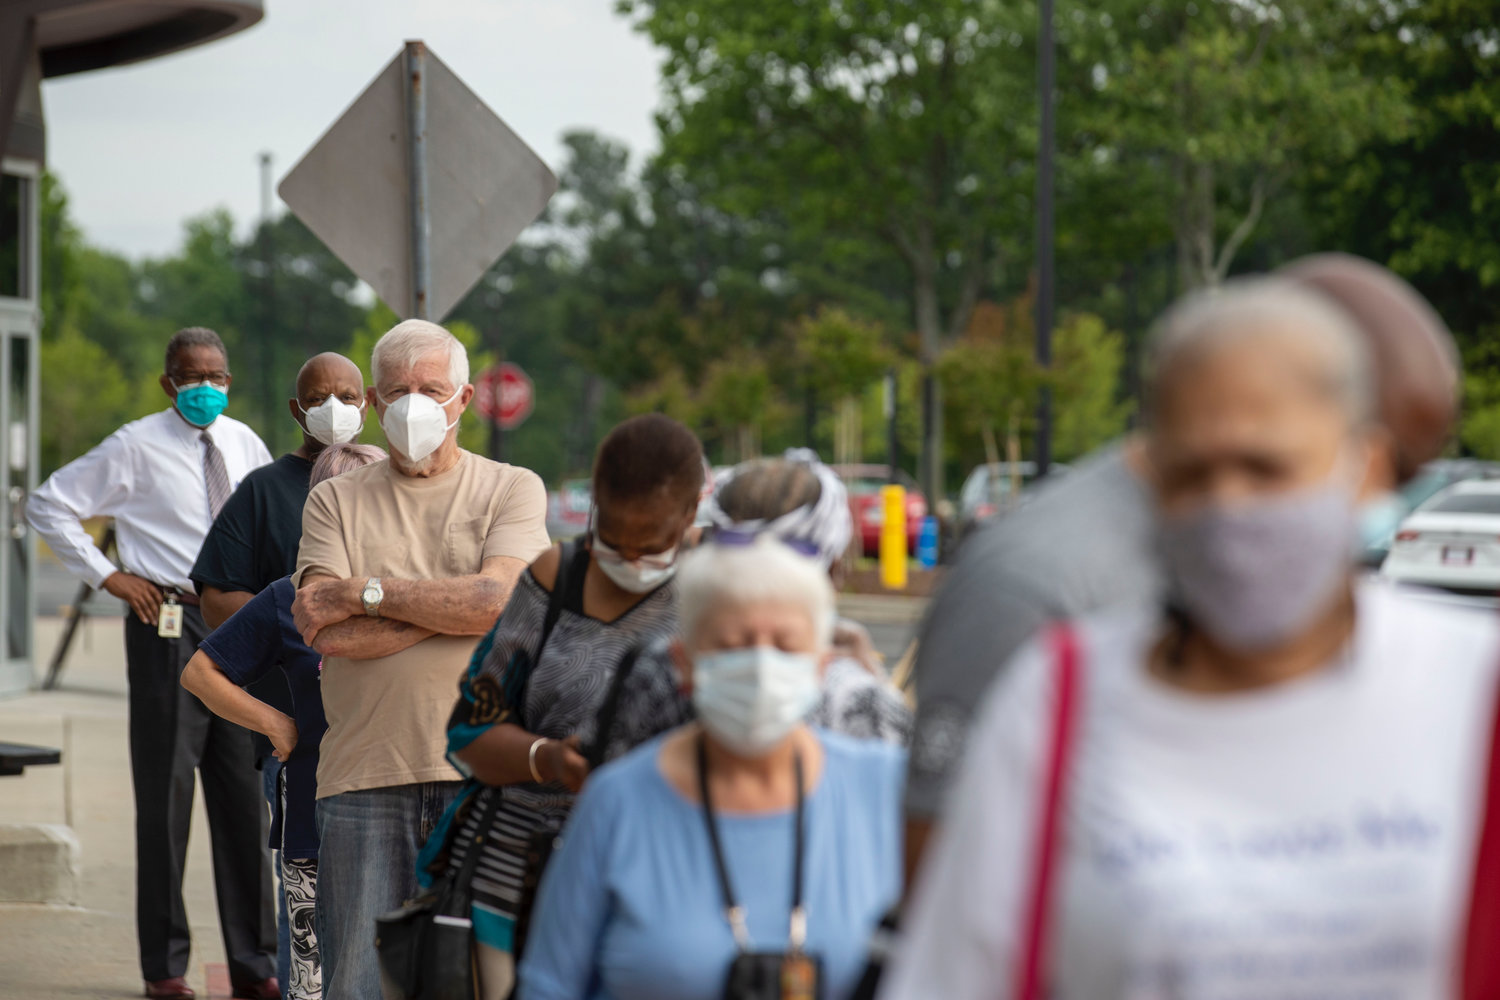 Voters wearing face masks stand in line outside of the Gwinnett County Voter Registration and Elections Office in order to participate in early voting in Lawrenceville on Monday.